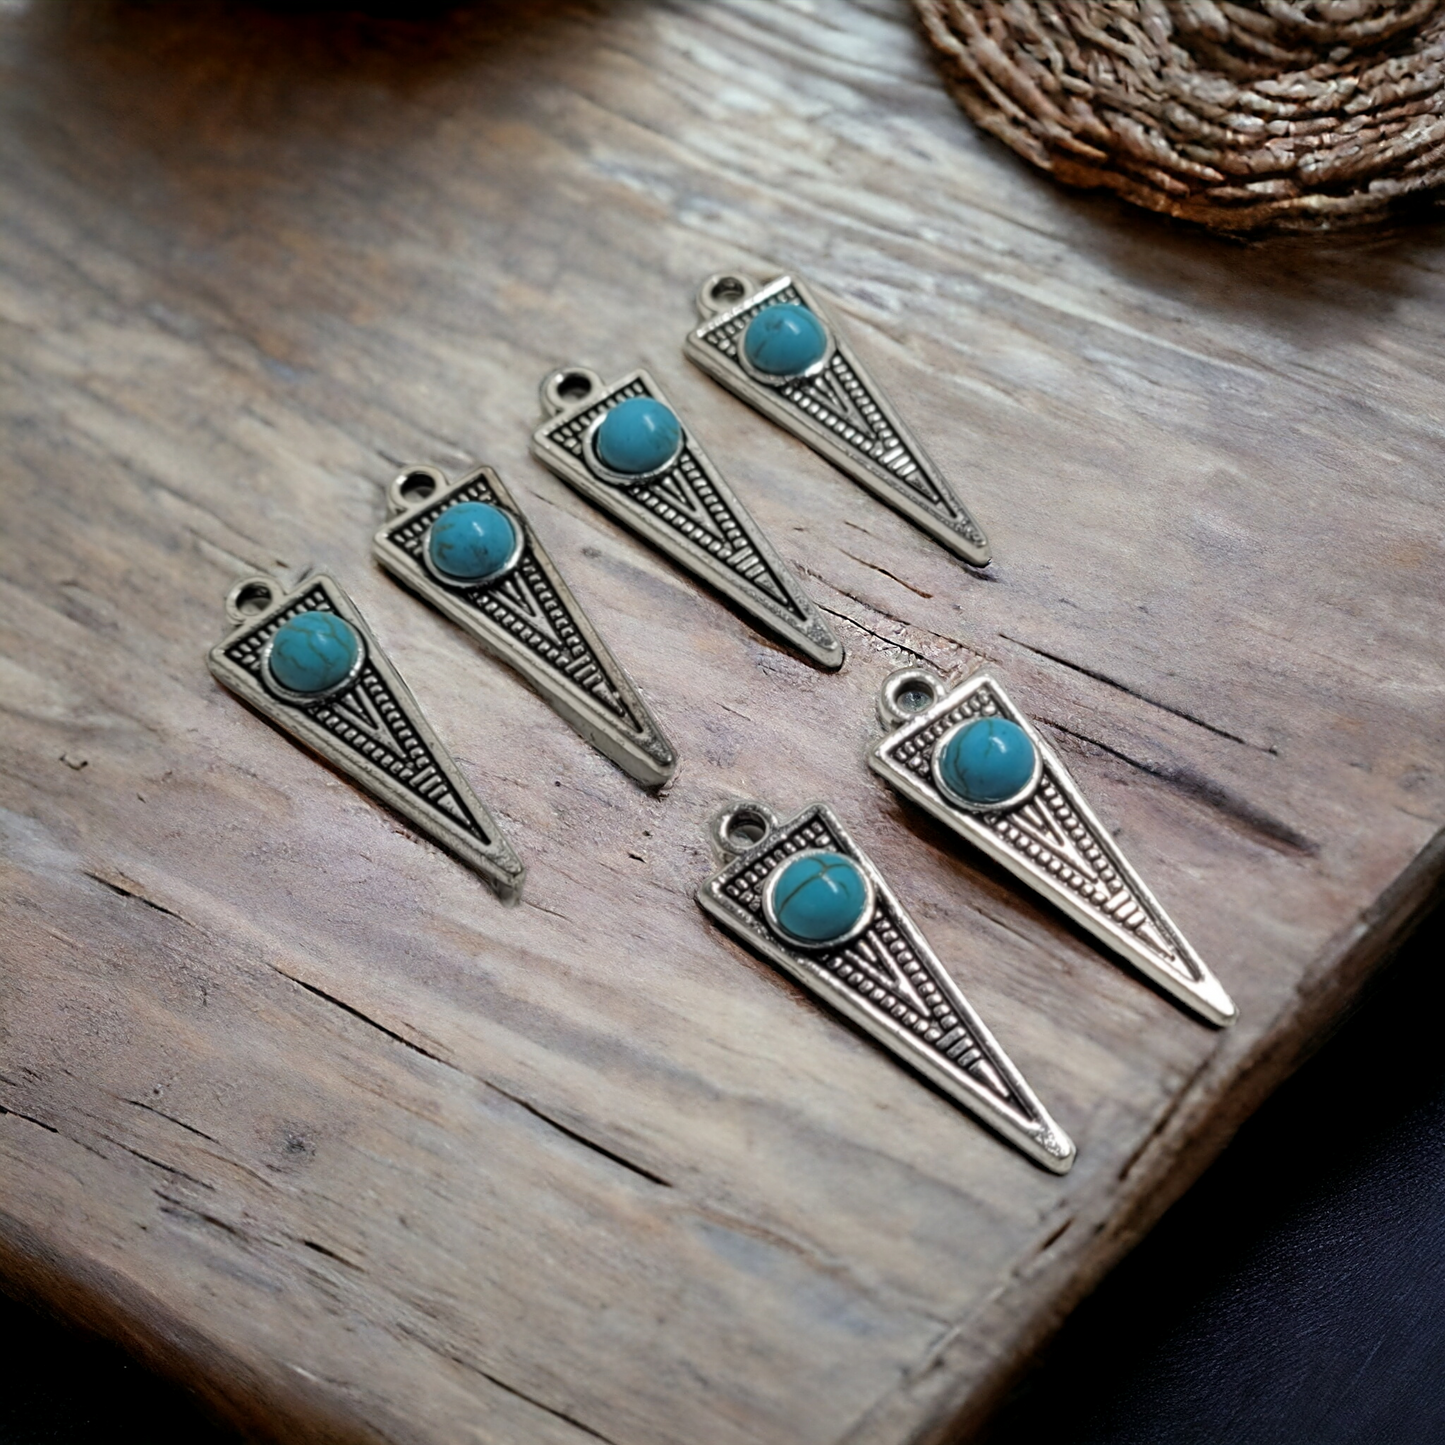 Retro Geometric Pointed Turquoise/Silver Charms - 6 pieces - Earring Findings